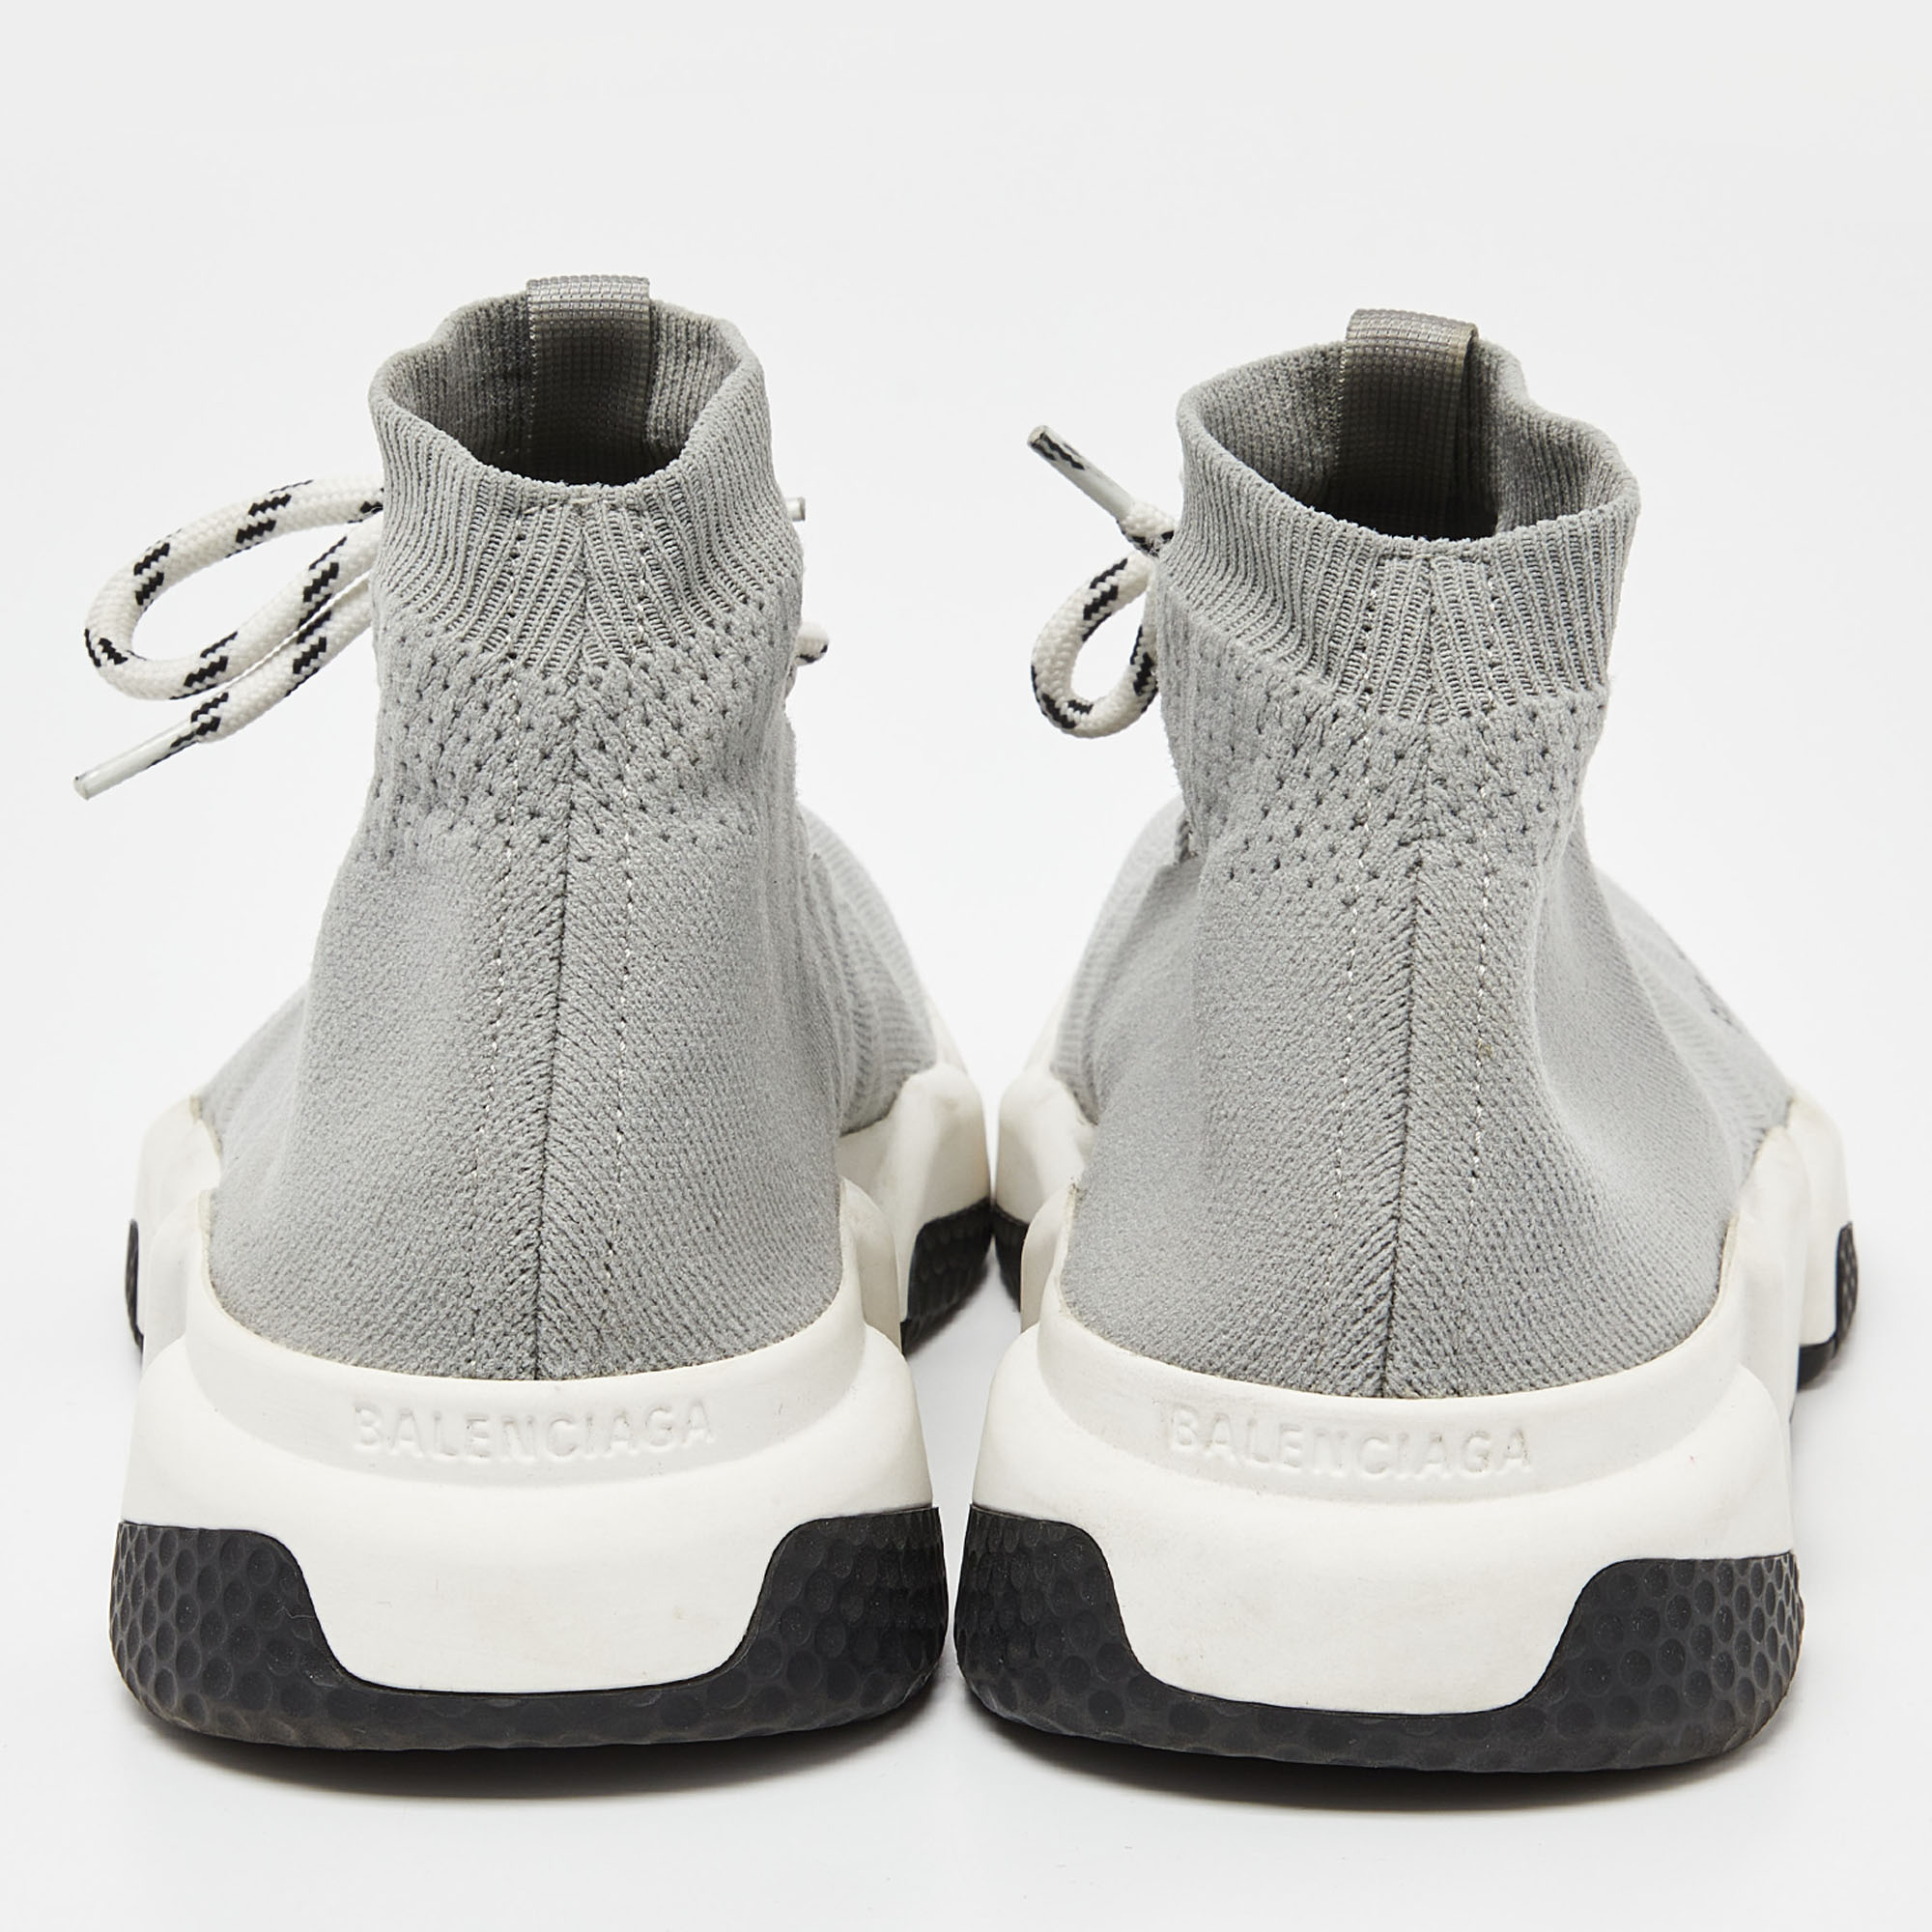 Balenciaga Grey Knit Speed Trainer High Top Sneakers Size 40